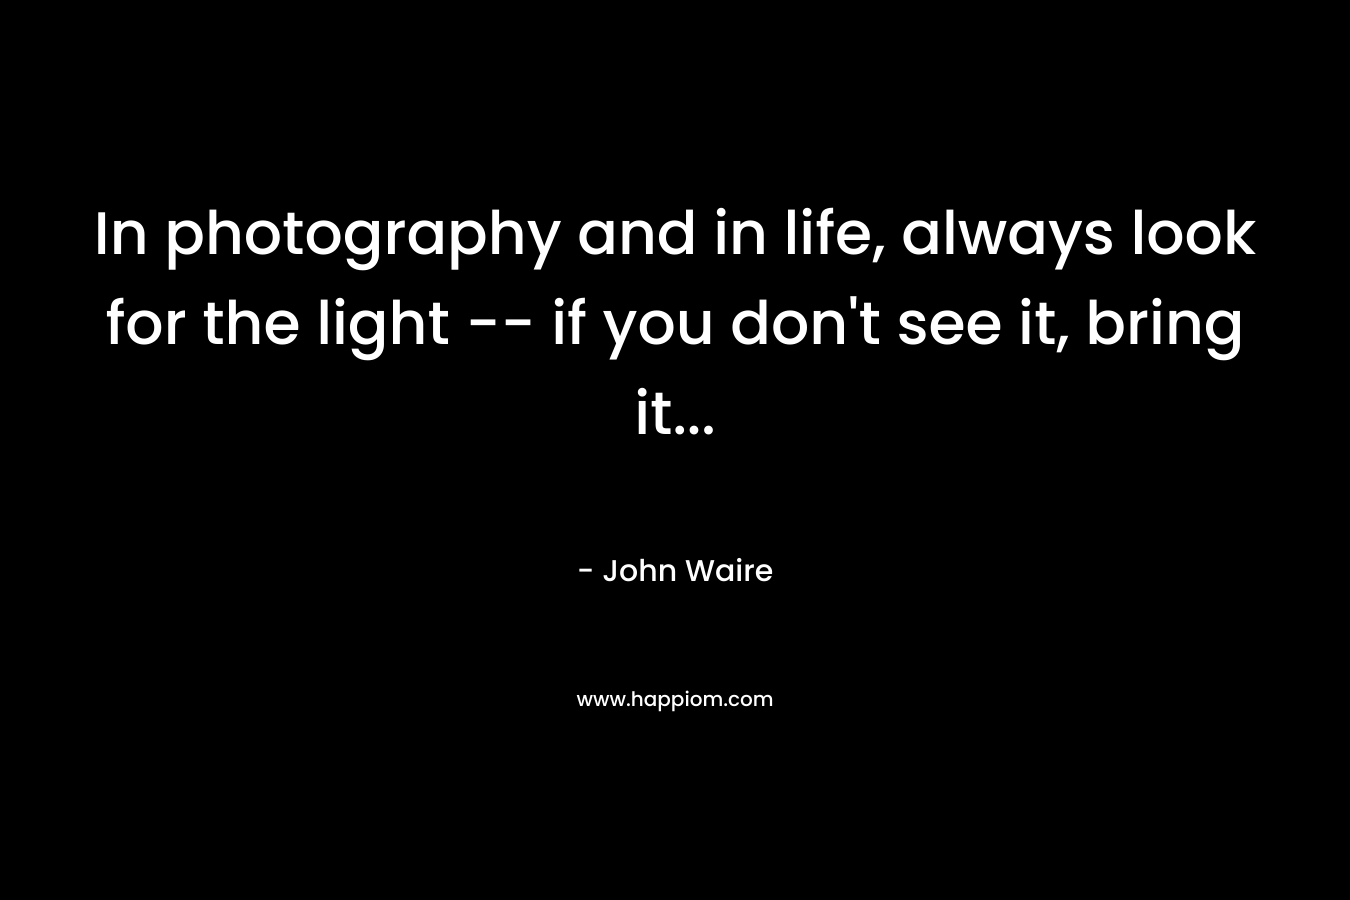 In photography and in life, always look for the light -- if you don't see it, bring it...